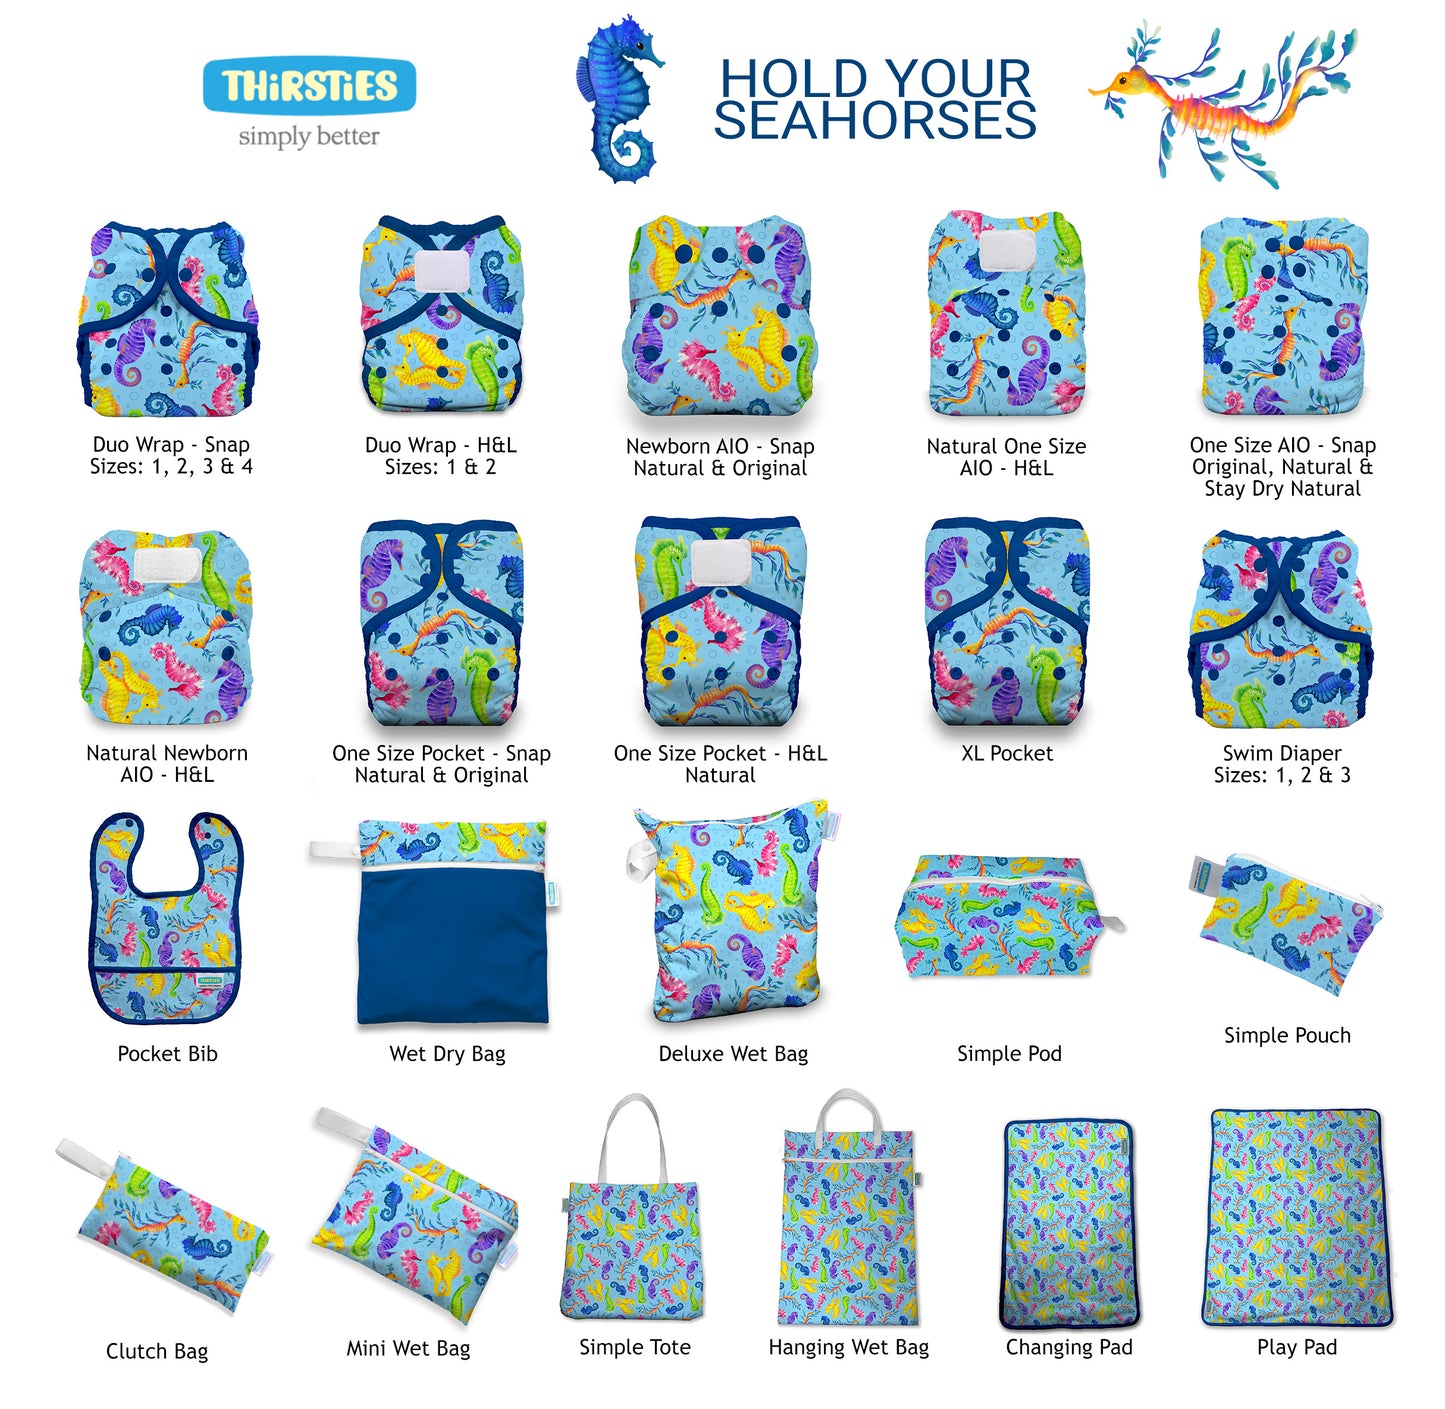 Thirsties Limited Edition Hold Your Seahorses